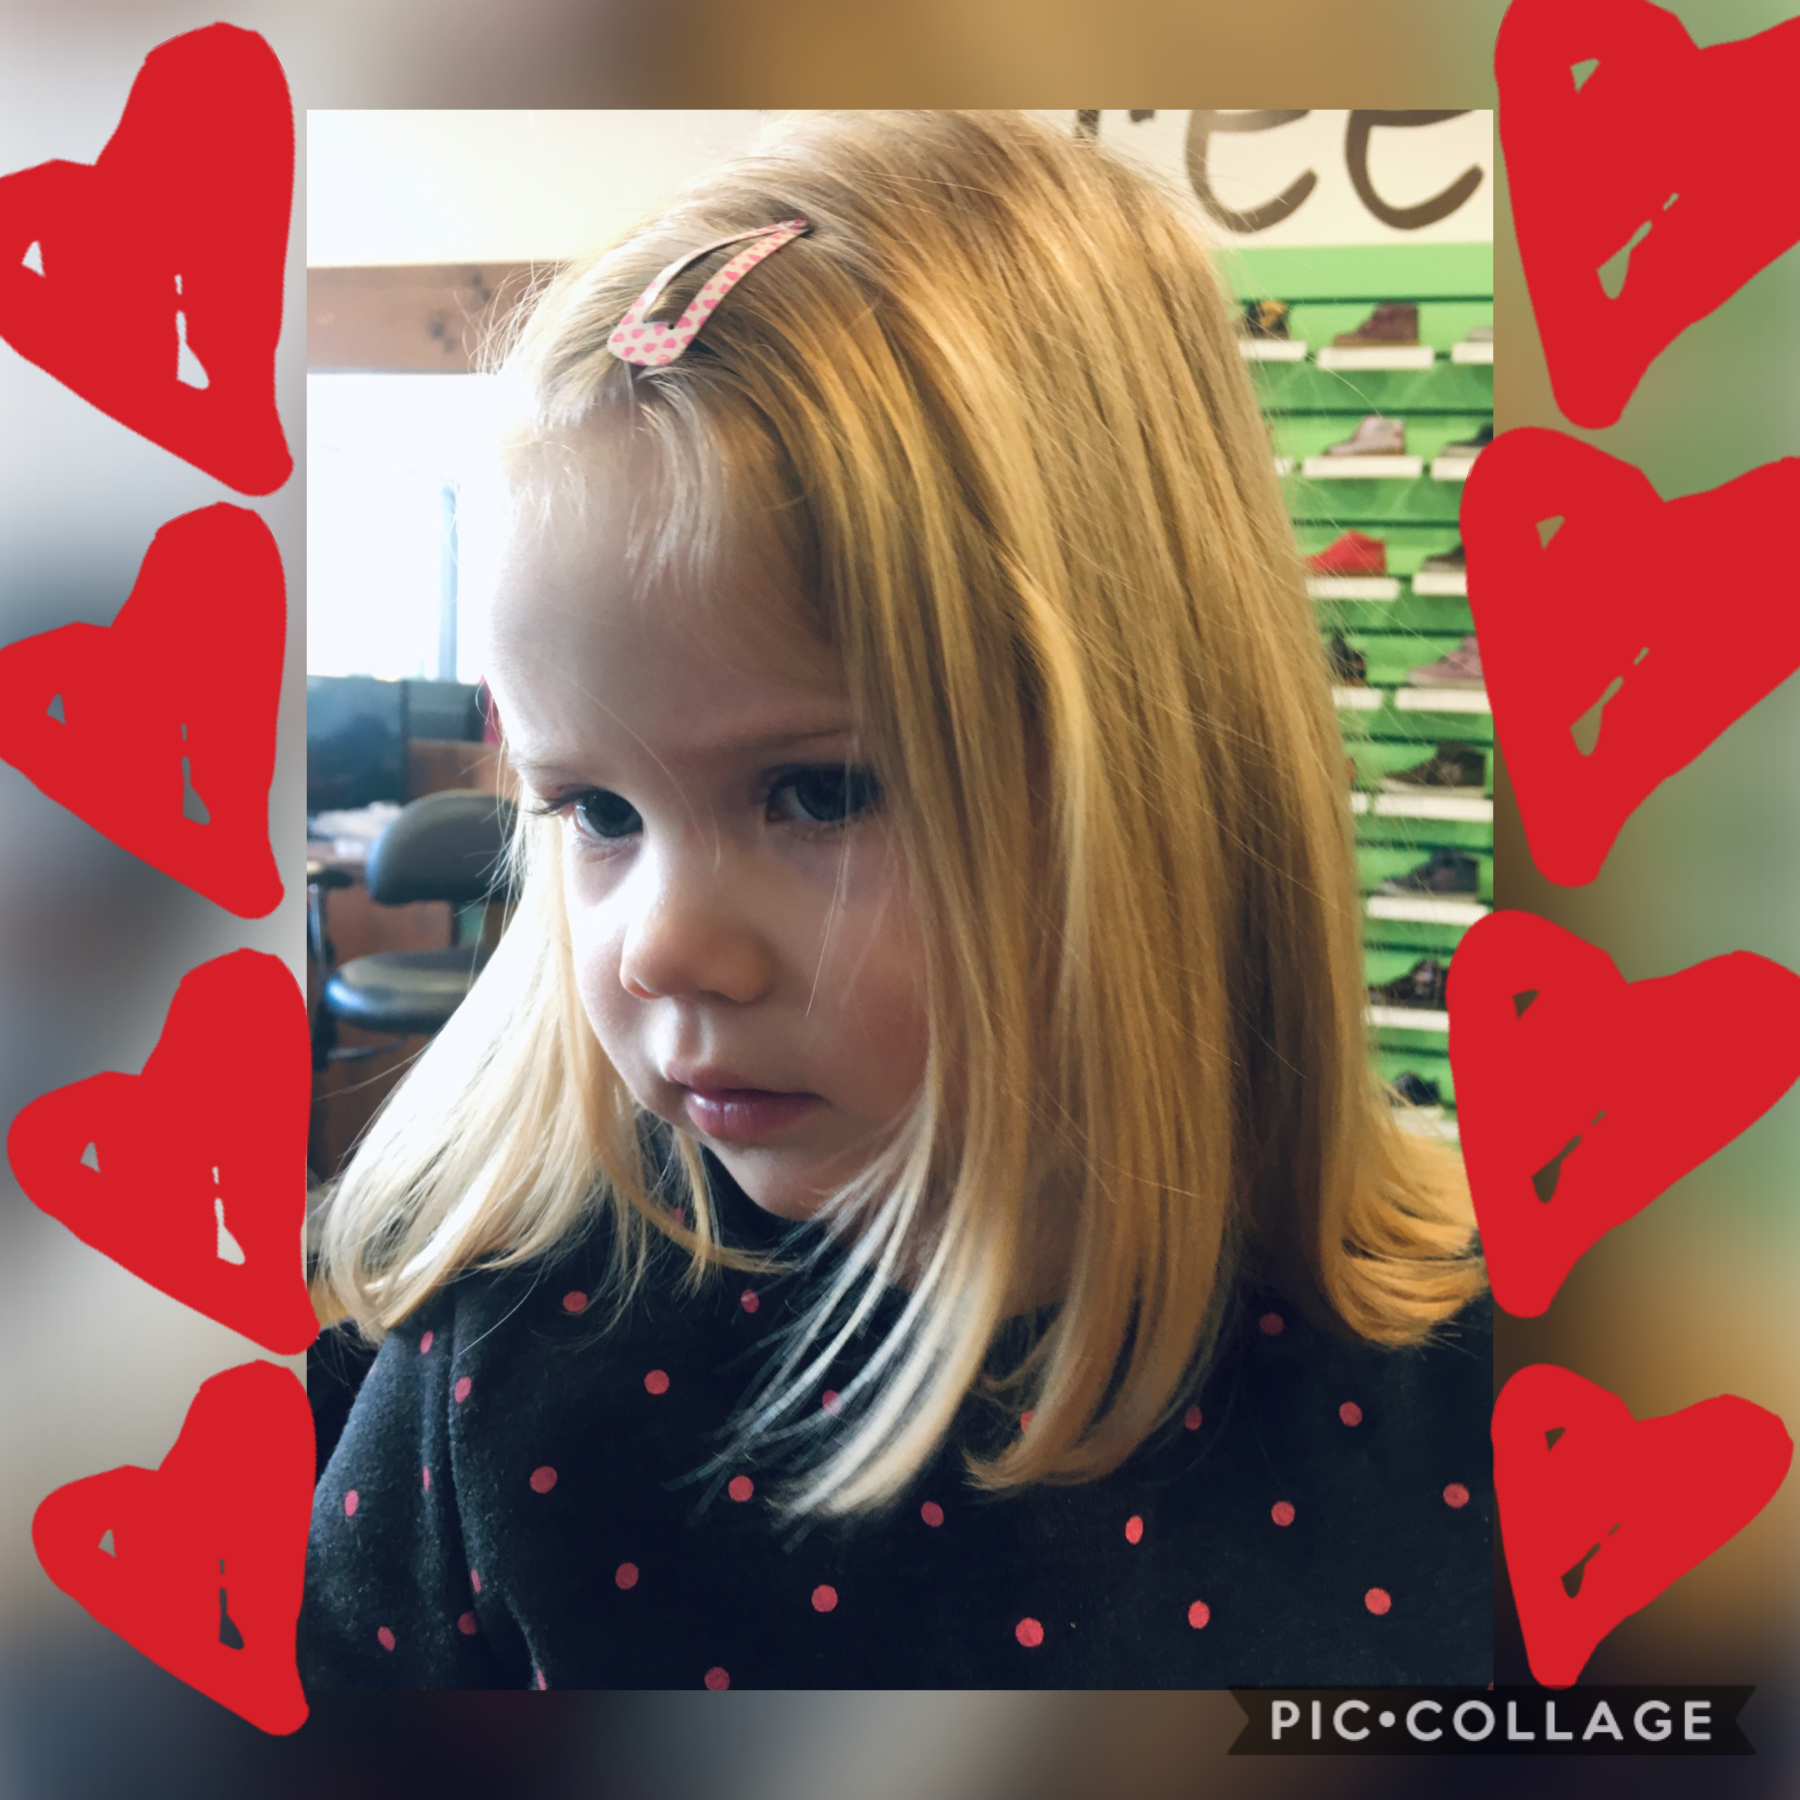 This is my sister leave a heart if you think she is adorable 🥰 